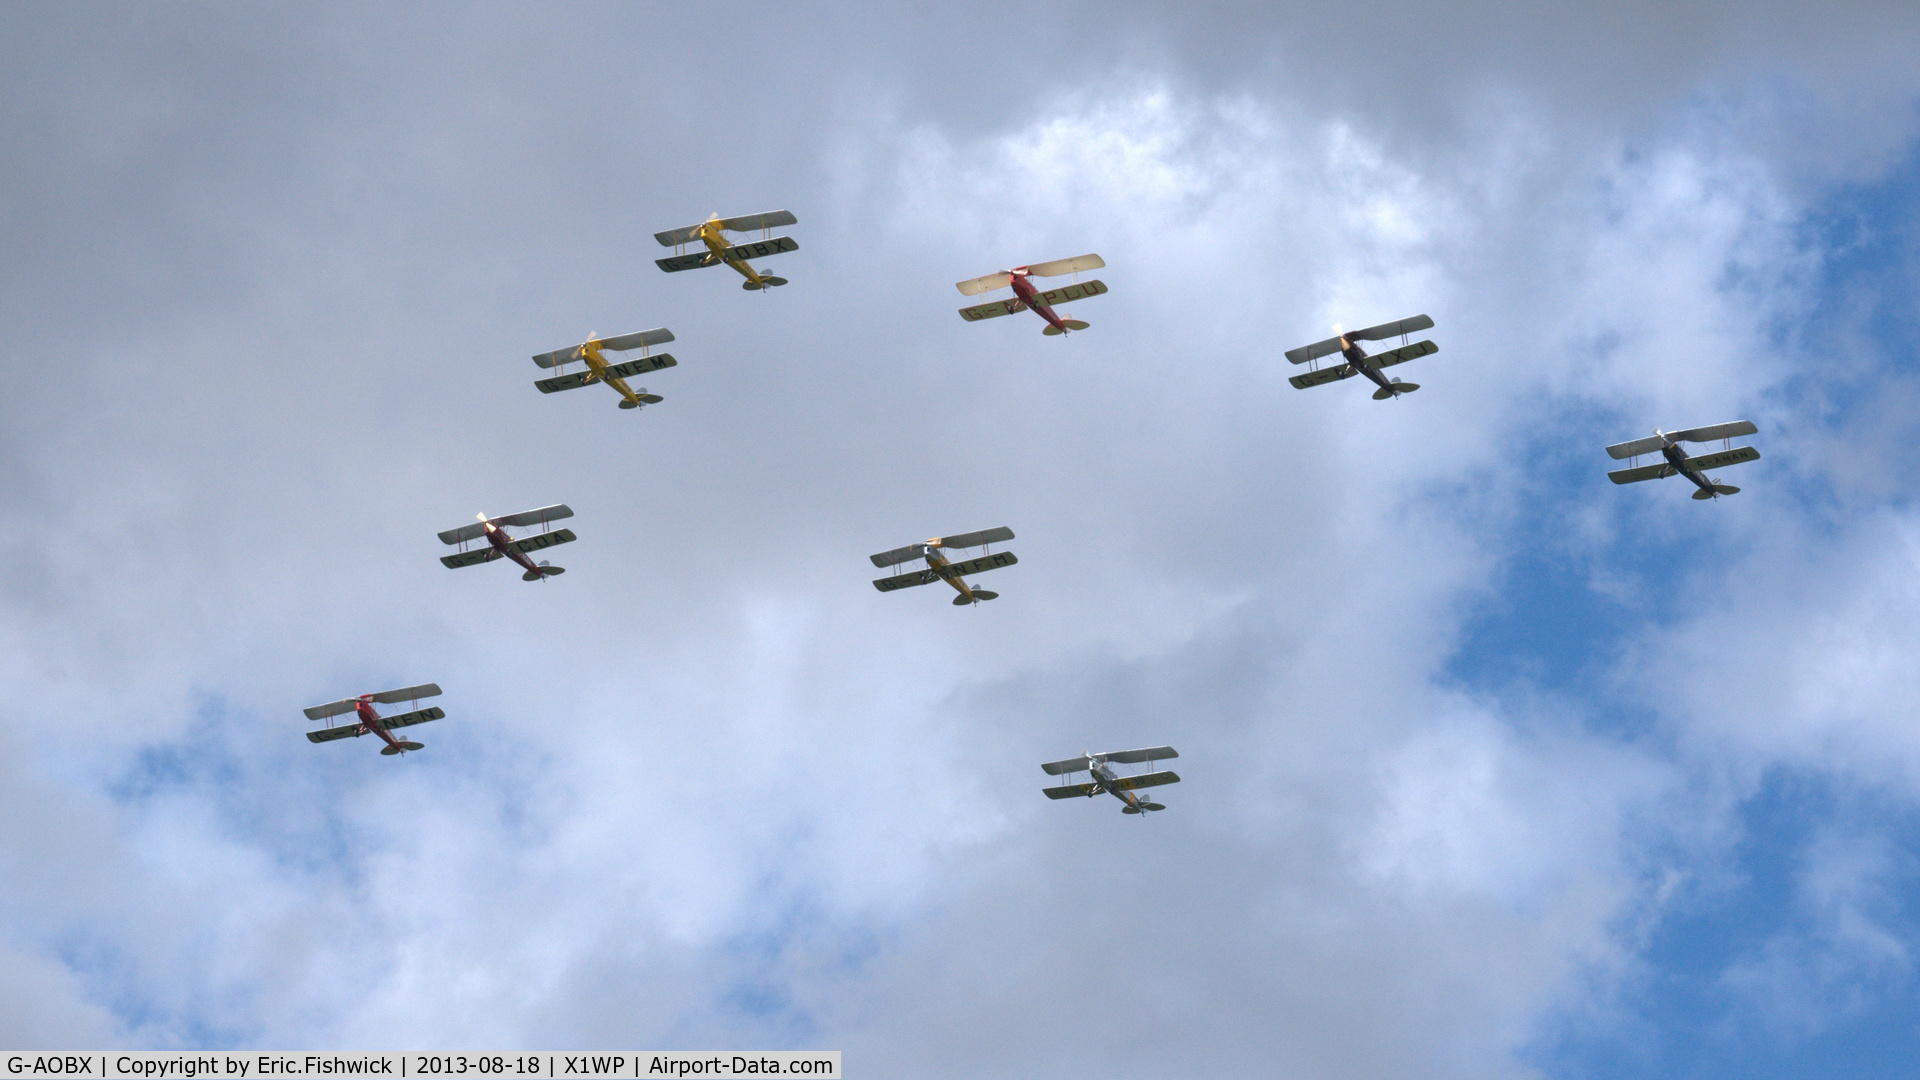 G-AOBX, 1940 De Havilland DH-82A Tiger Moth II C/N 83653, 45. G-AOBX leading the Tiger 9 Formation Display Team at The 28th. International Moth Rally at Woburn Abbey, Aug. 2013.